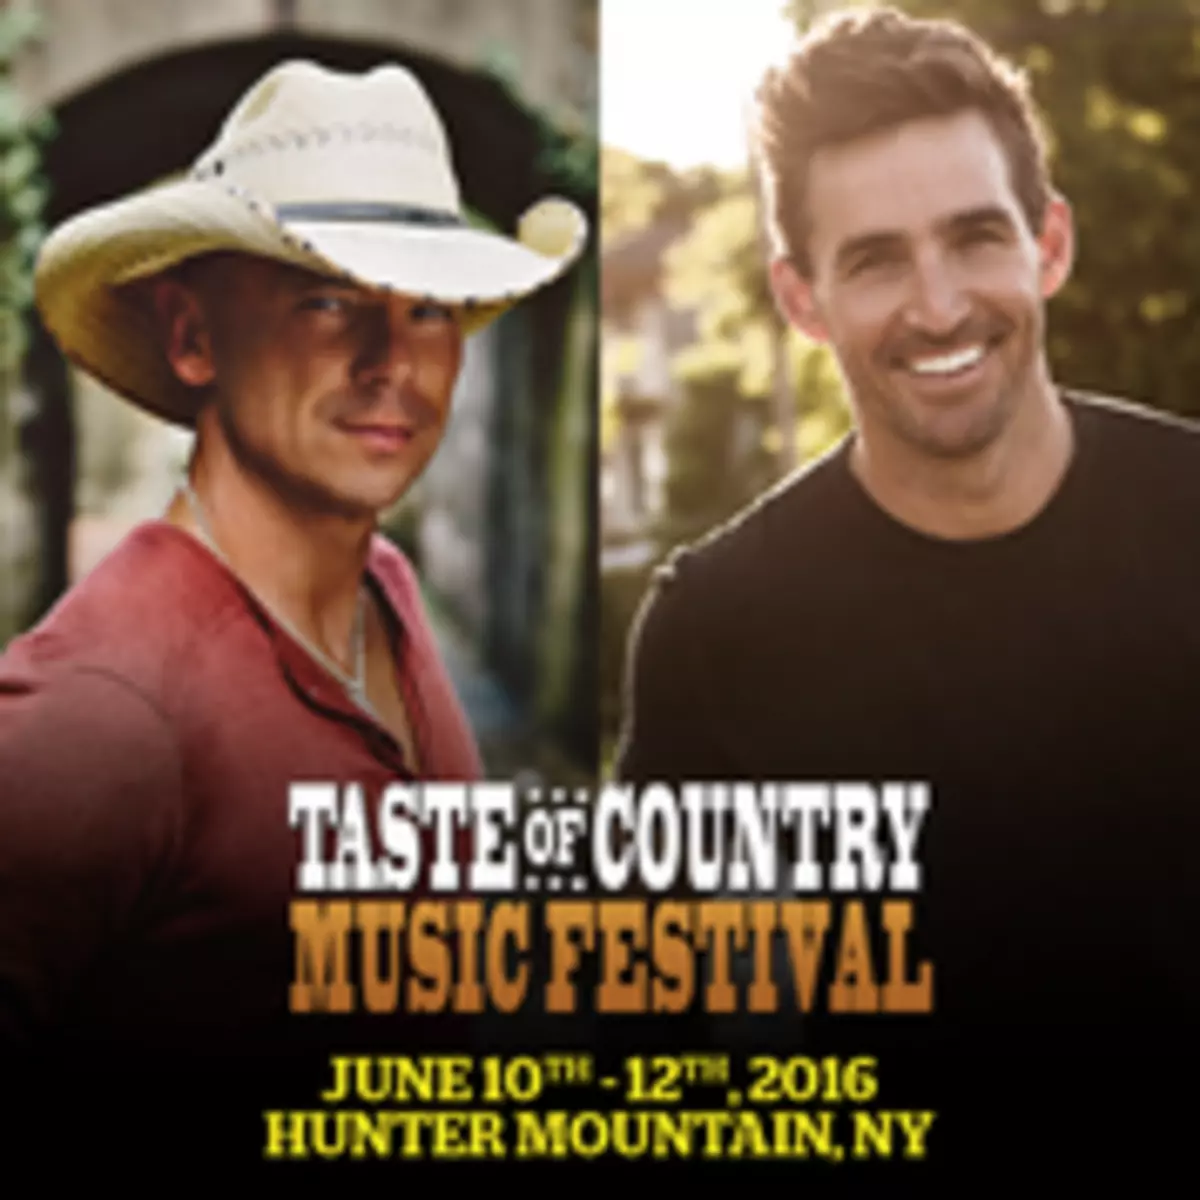 Taste of Country Music Festival Full Lineup Coming Wednesday! [DETAILS]